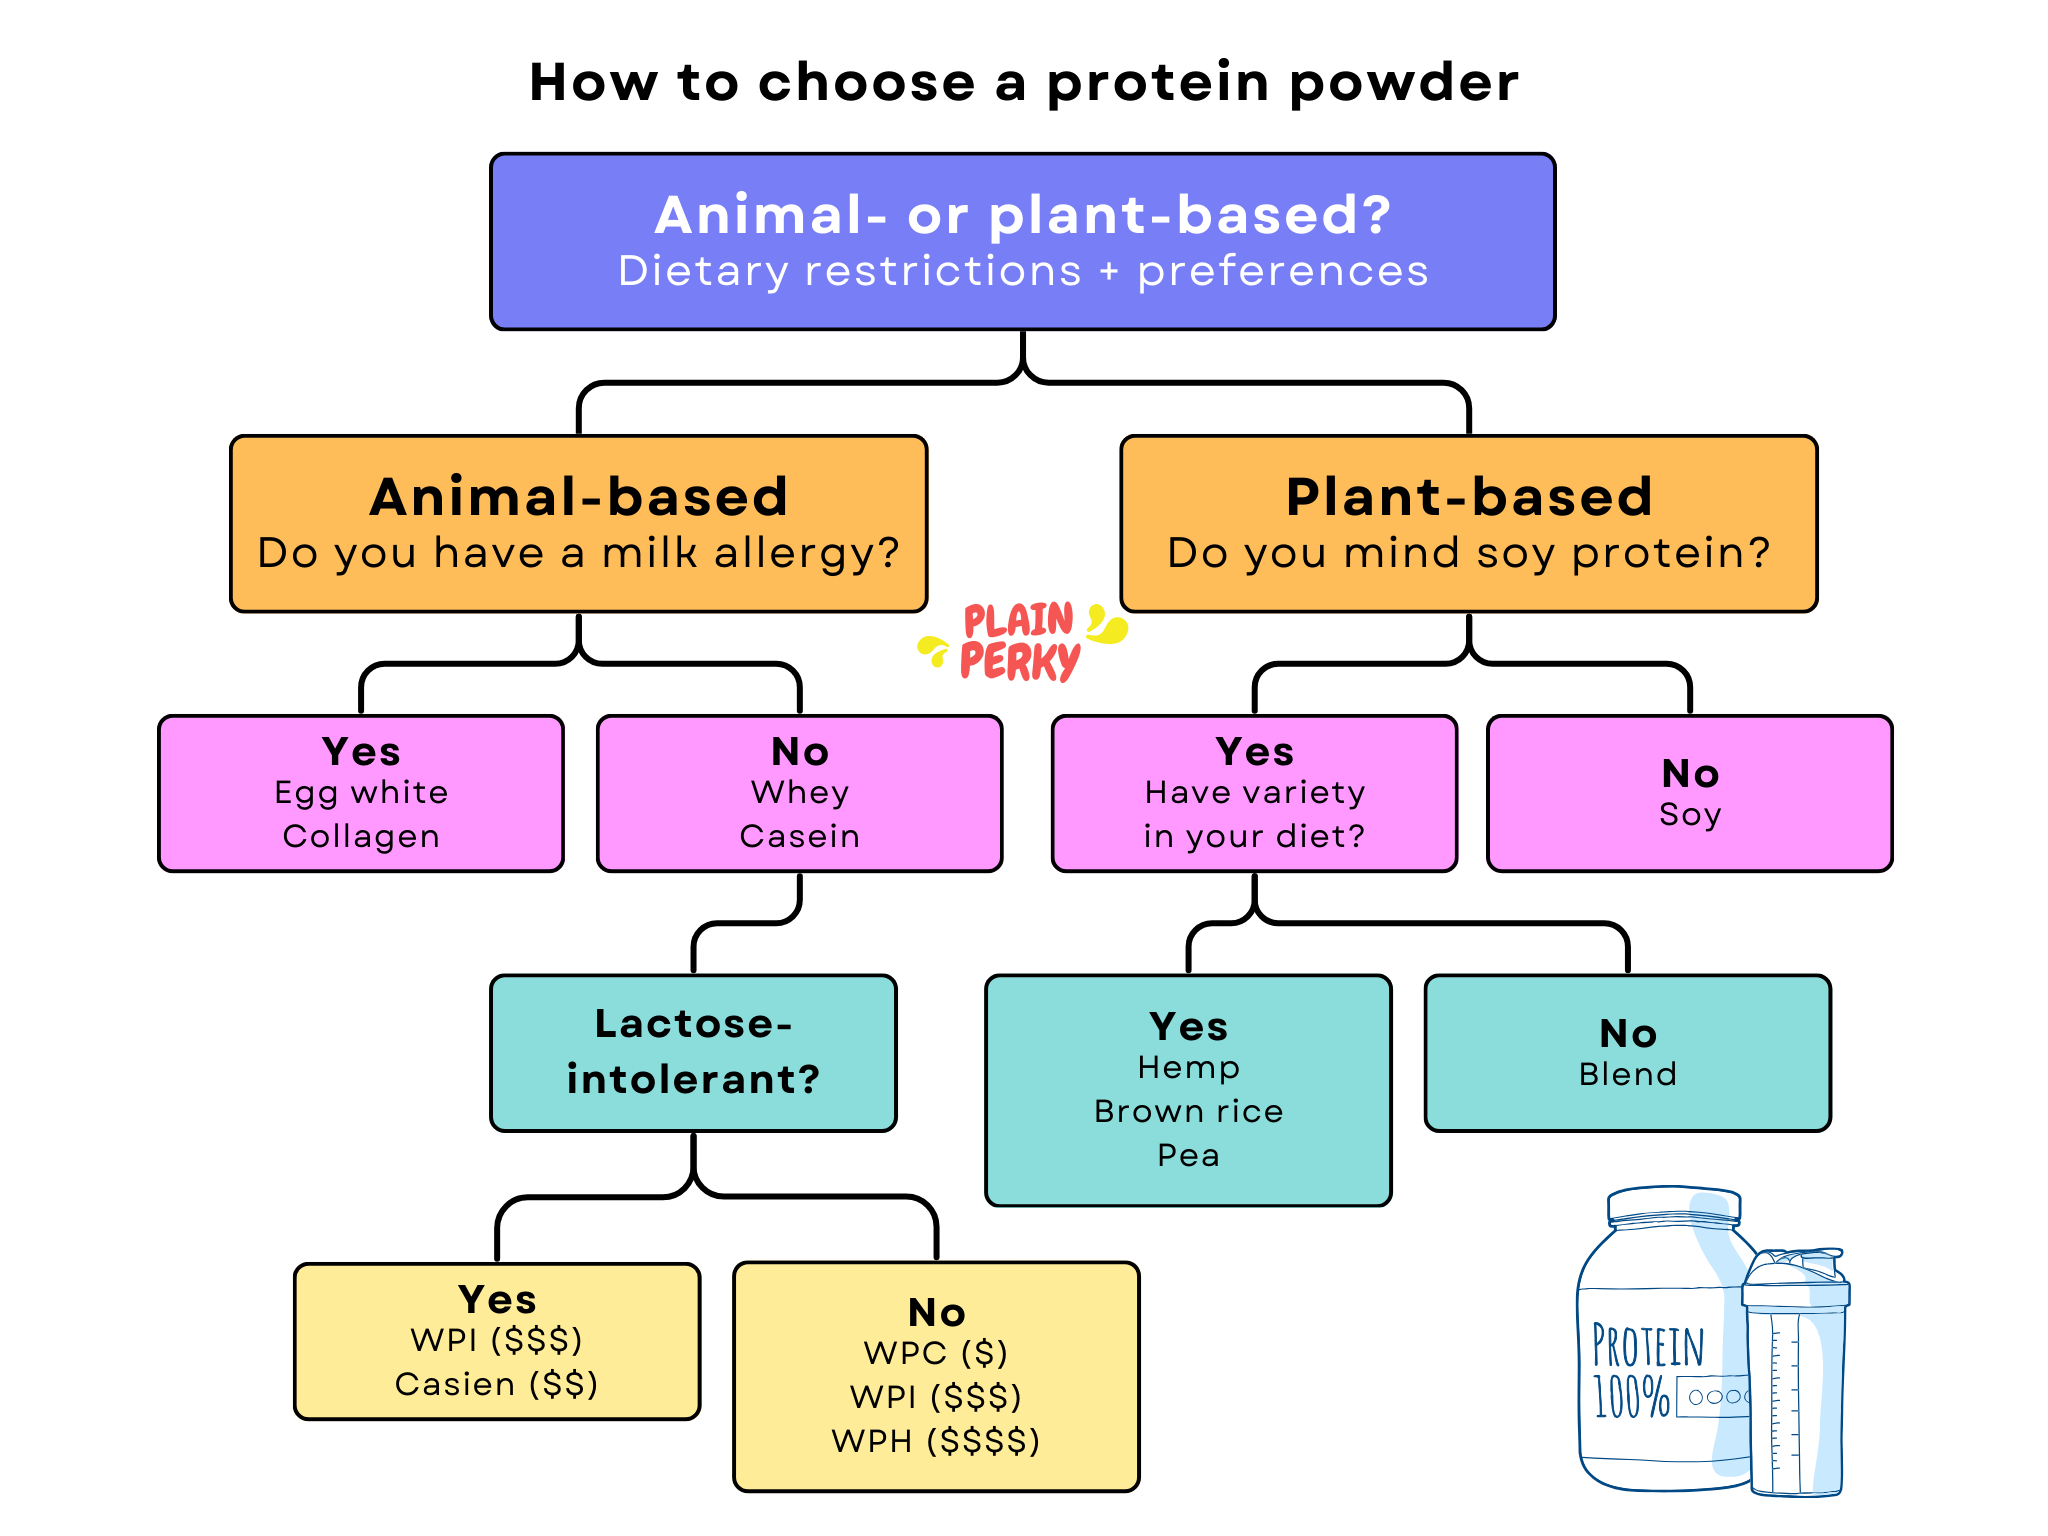 Flowchart on how to choose a protein powder depending on preferences and dietary restrictions